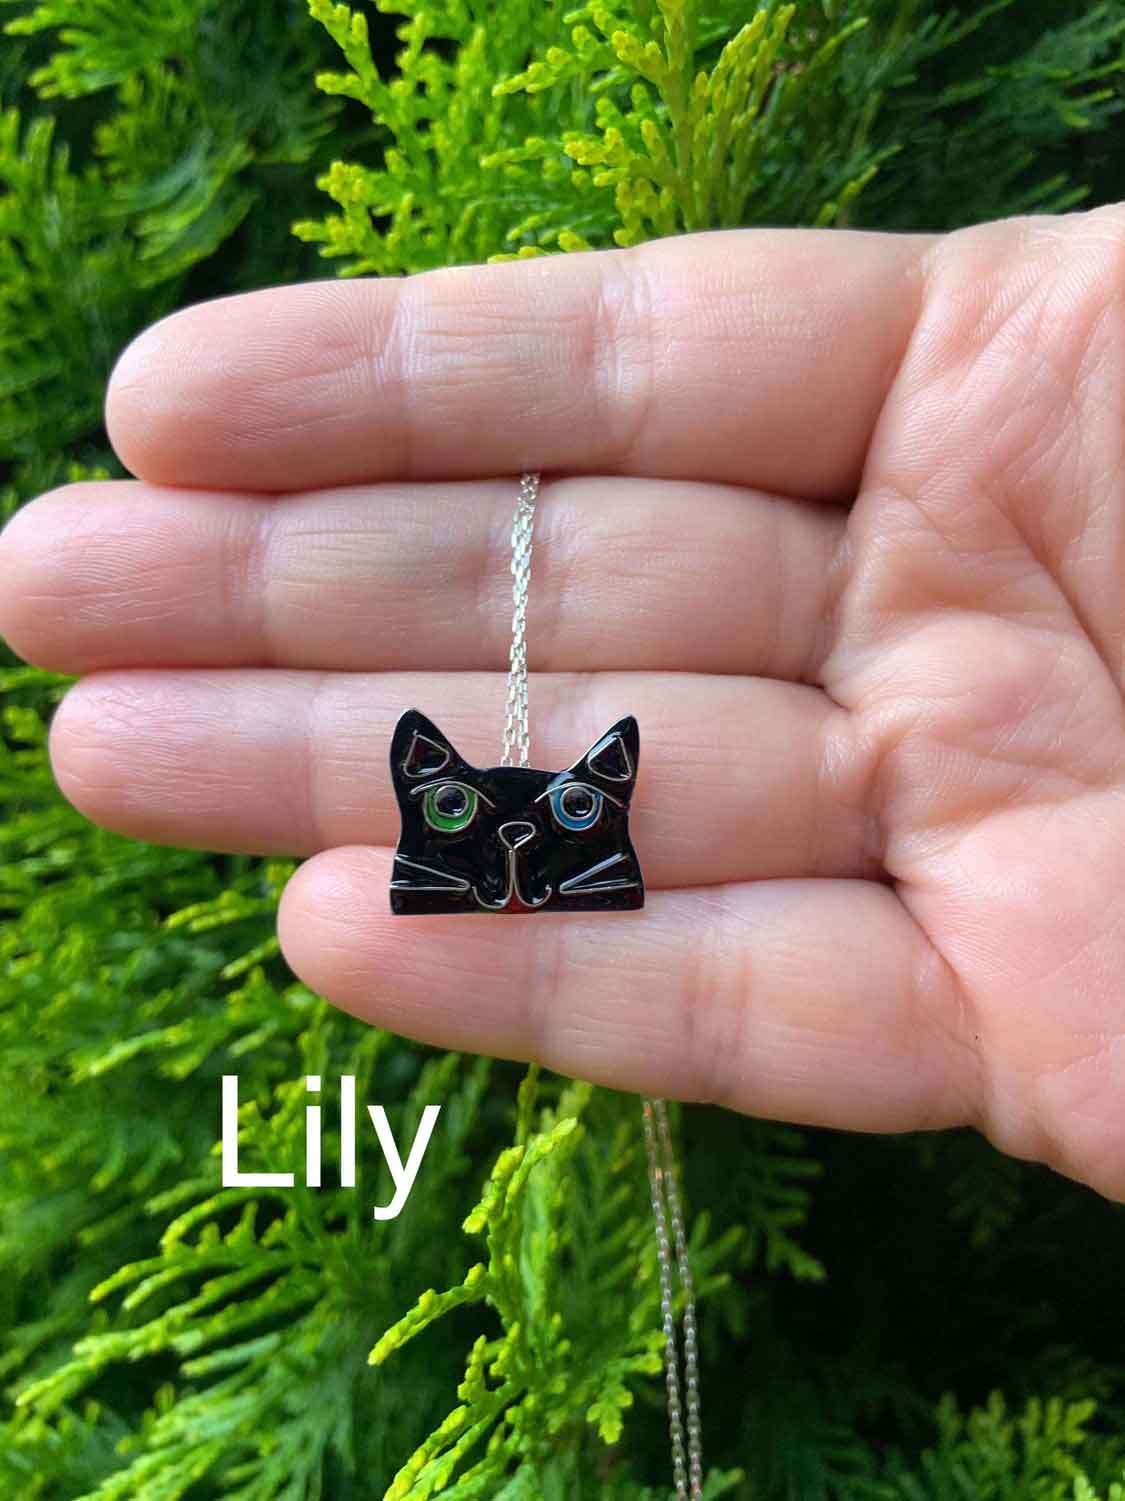 CLOISONNE ENAMEL SILVER Necklace, Cat Lover Necklace, Birthday Gifts, Love Handmade Jewelry, 925 Sterling Silver